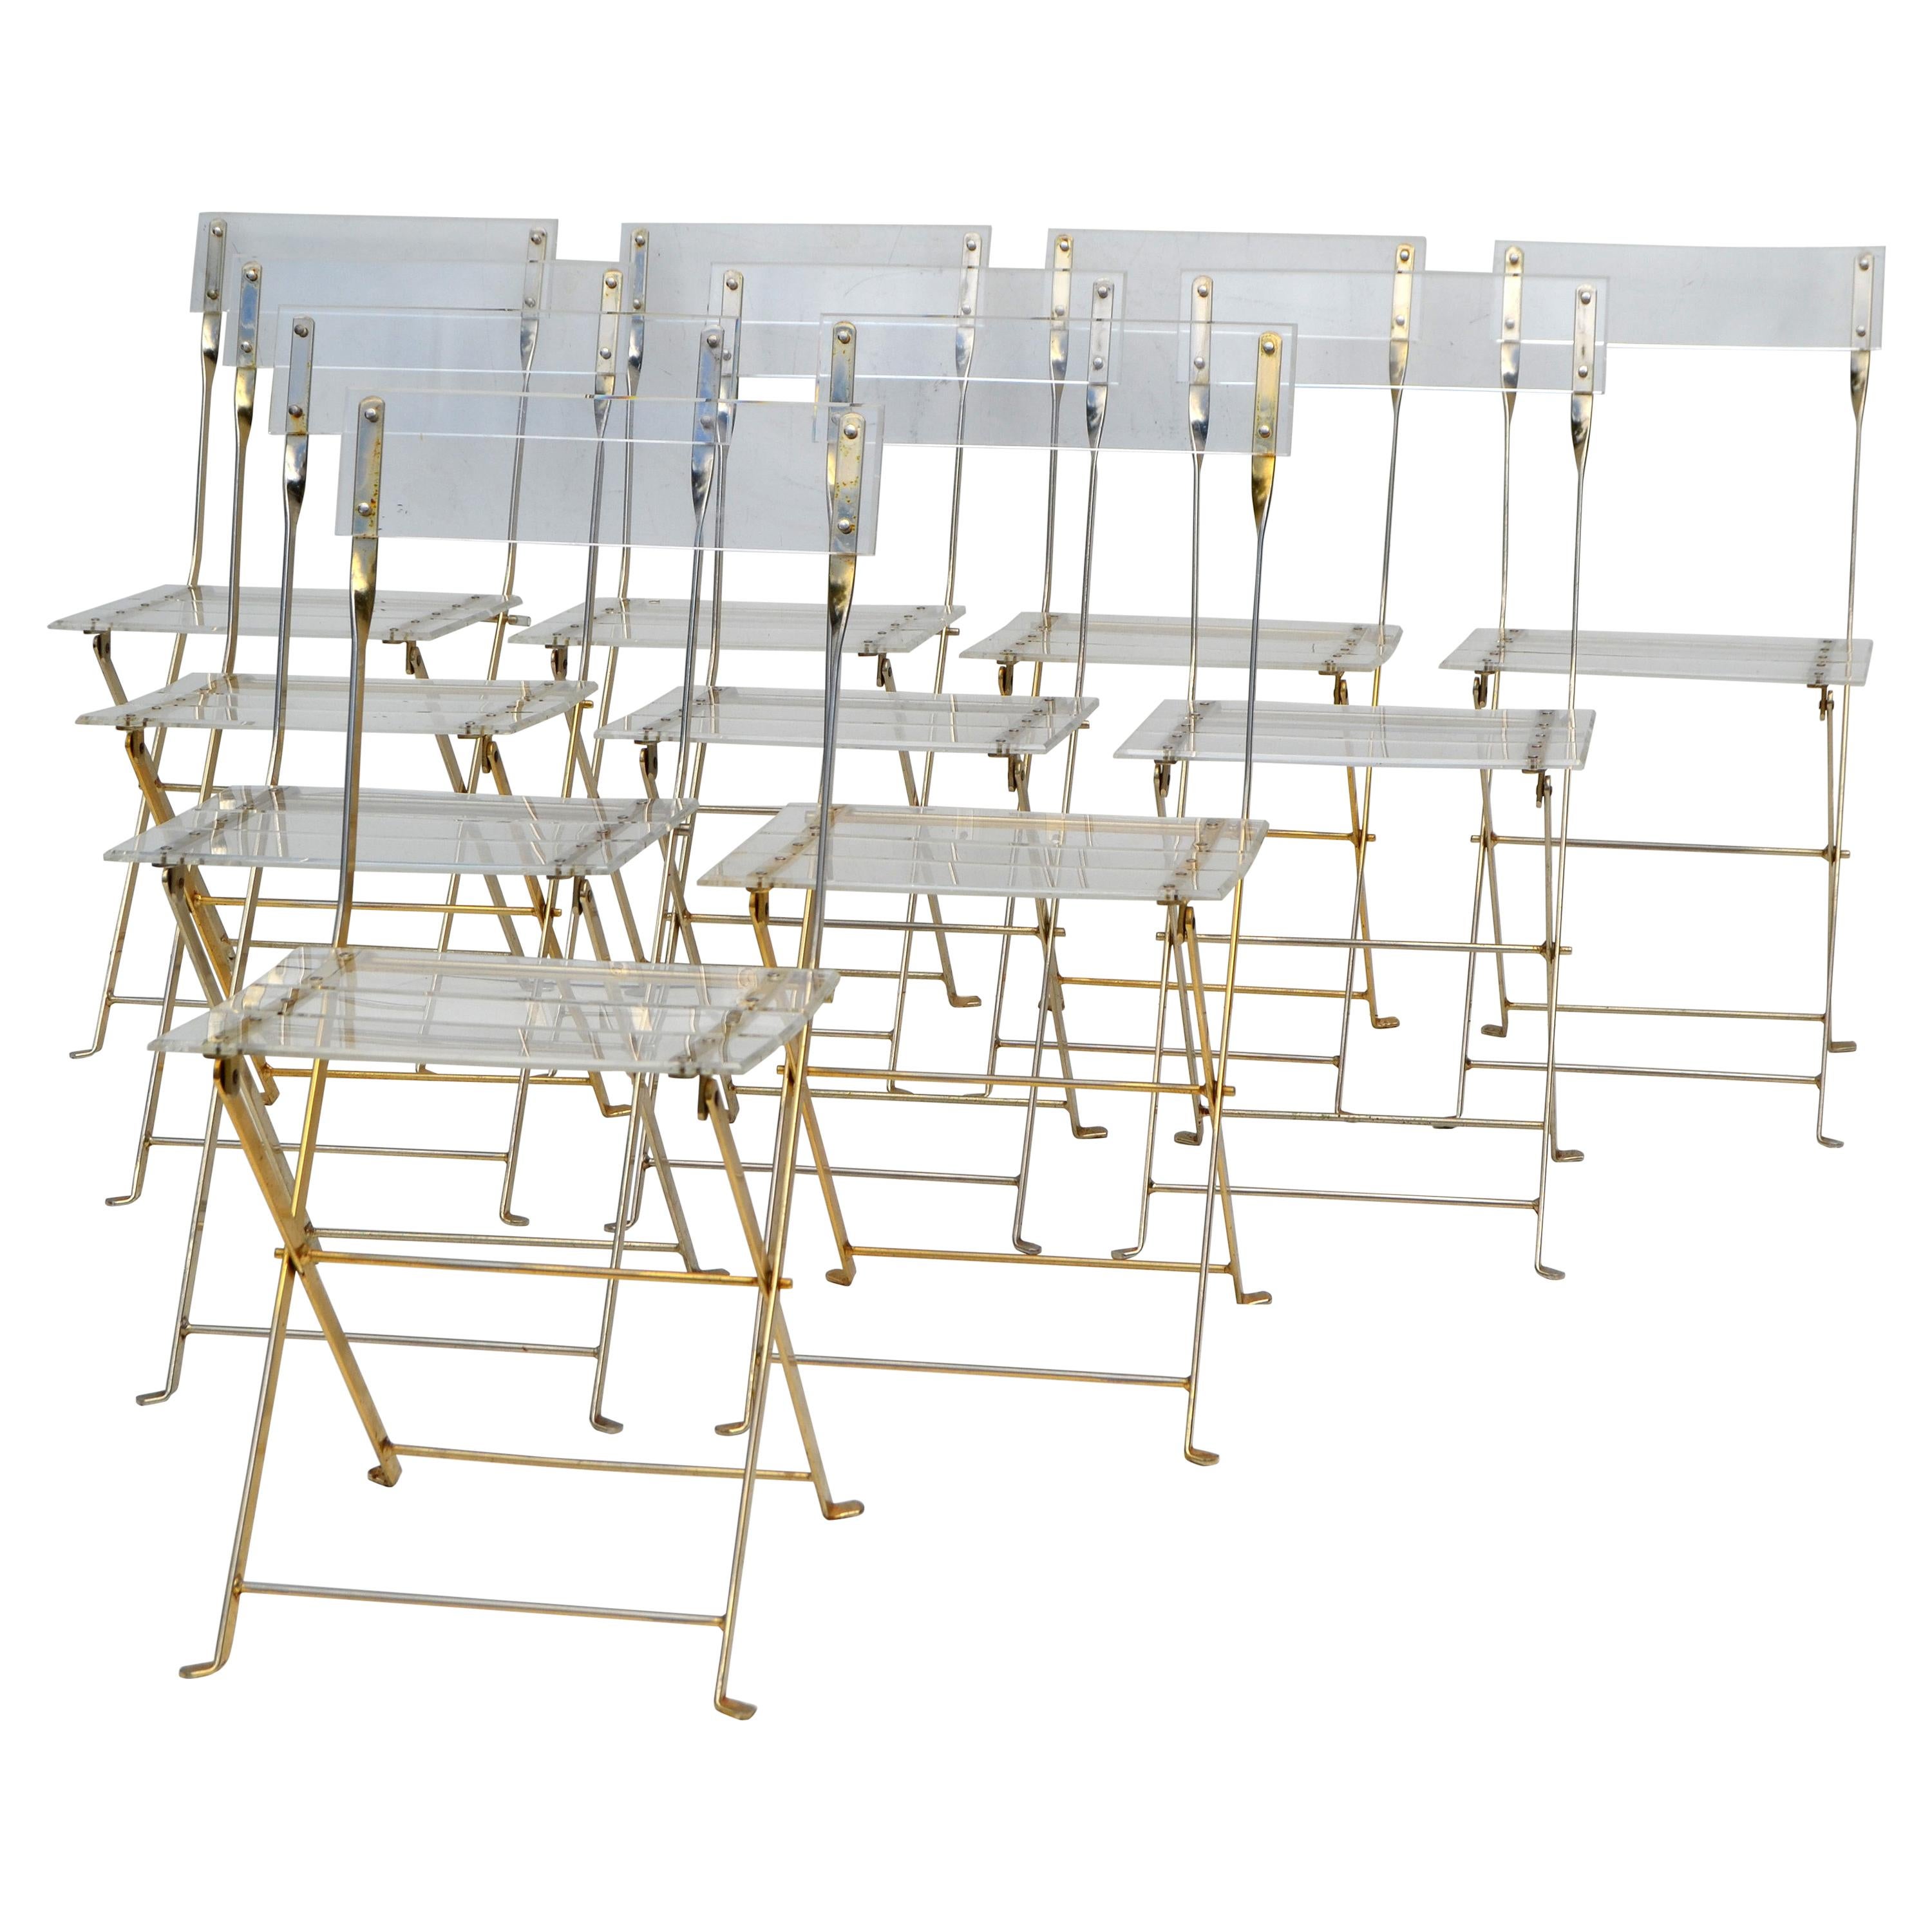 Set of 10 Lucite Folding Chairs by Yonel Lebovici for Marais International 1970